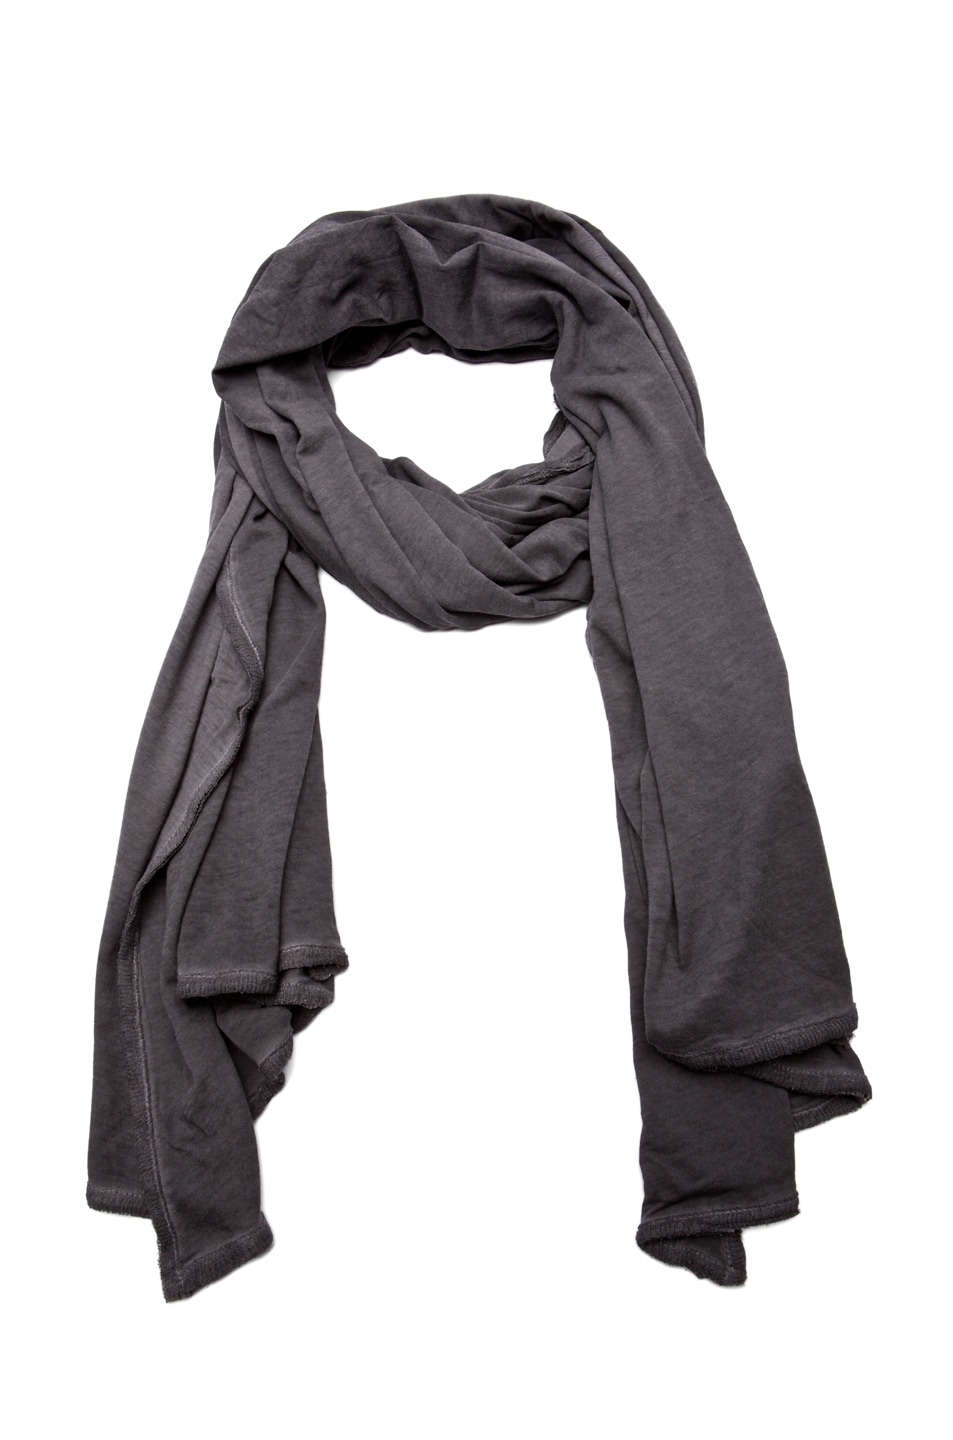 Image 1 of SILENT DAMIR DOMA Agon Scarf in Ash Grey